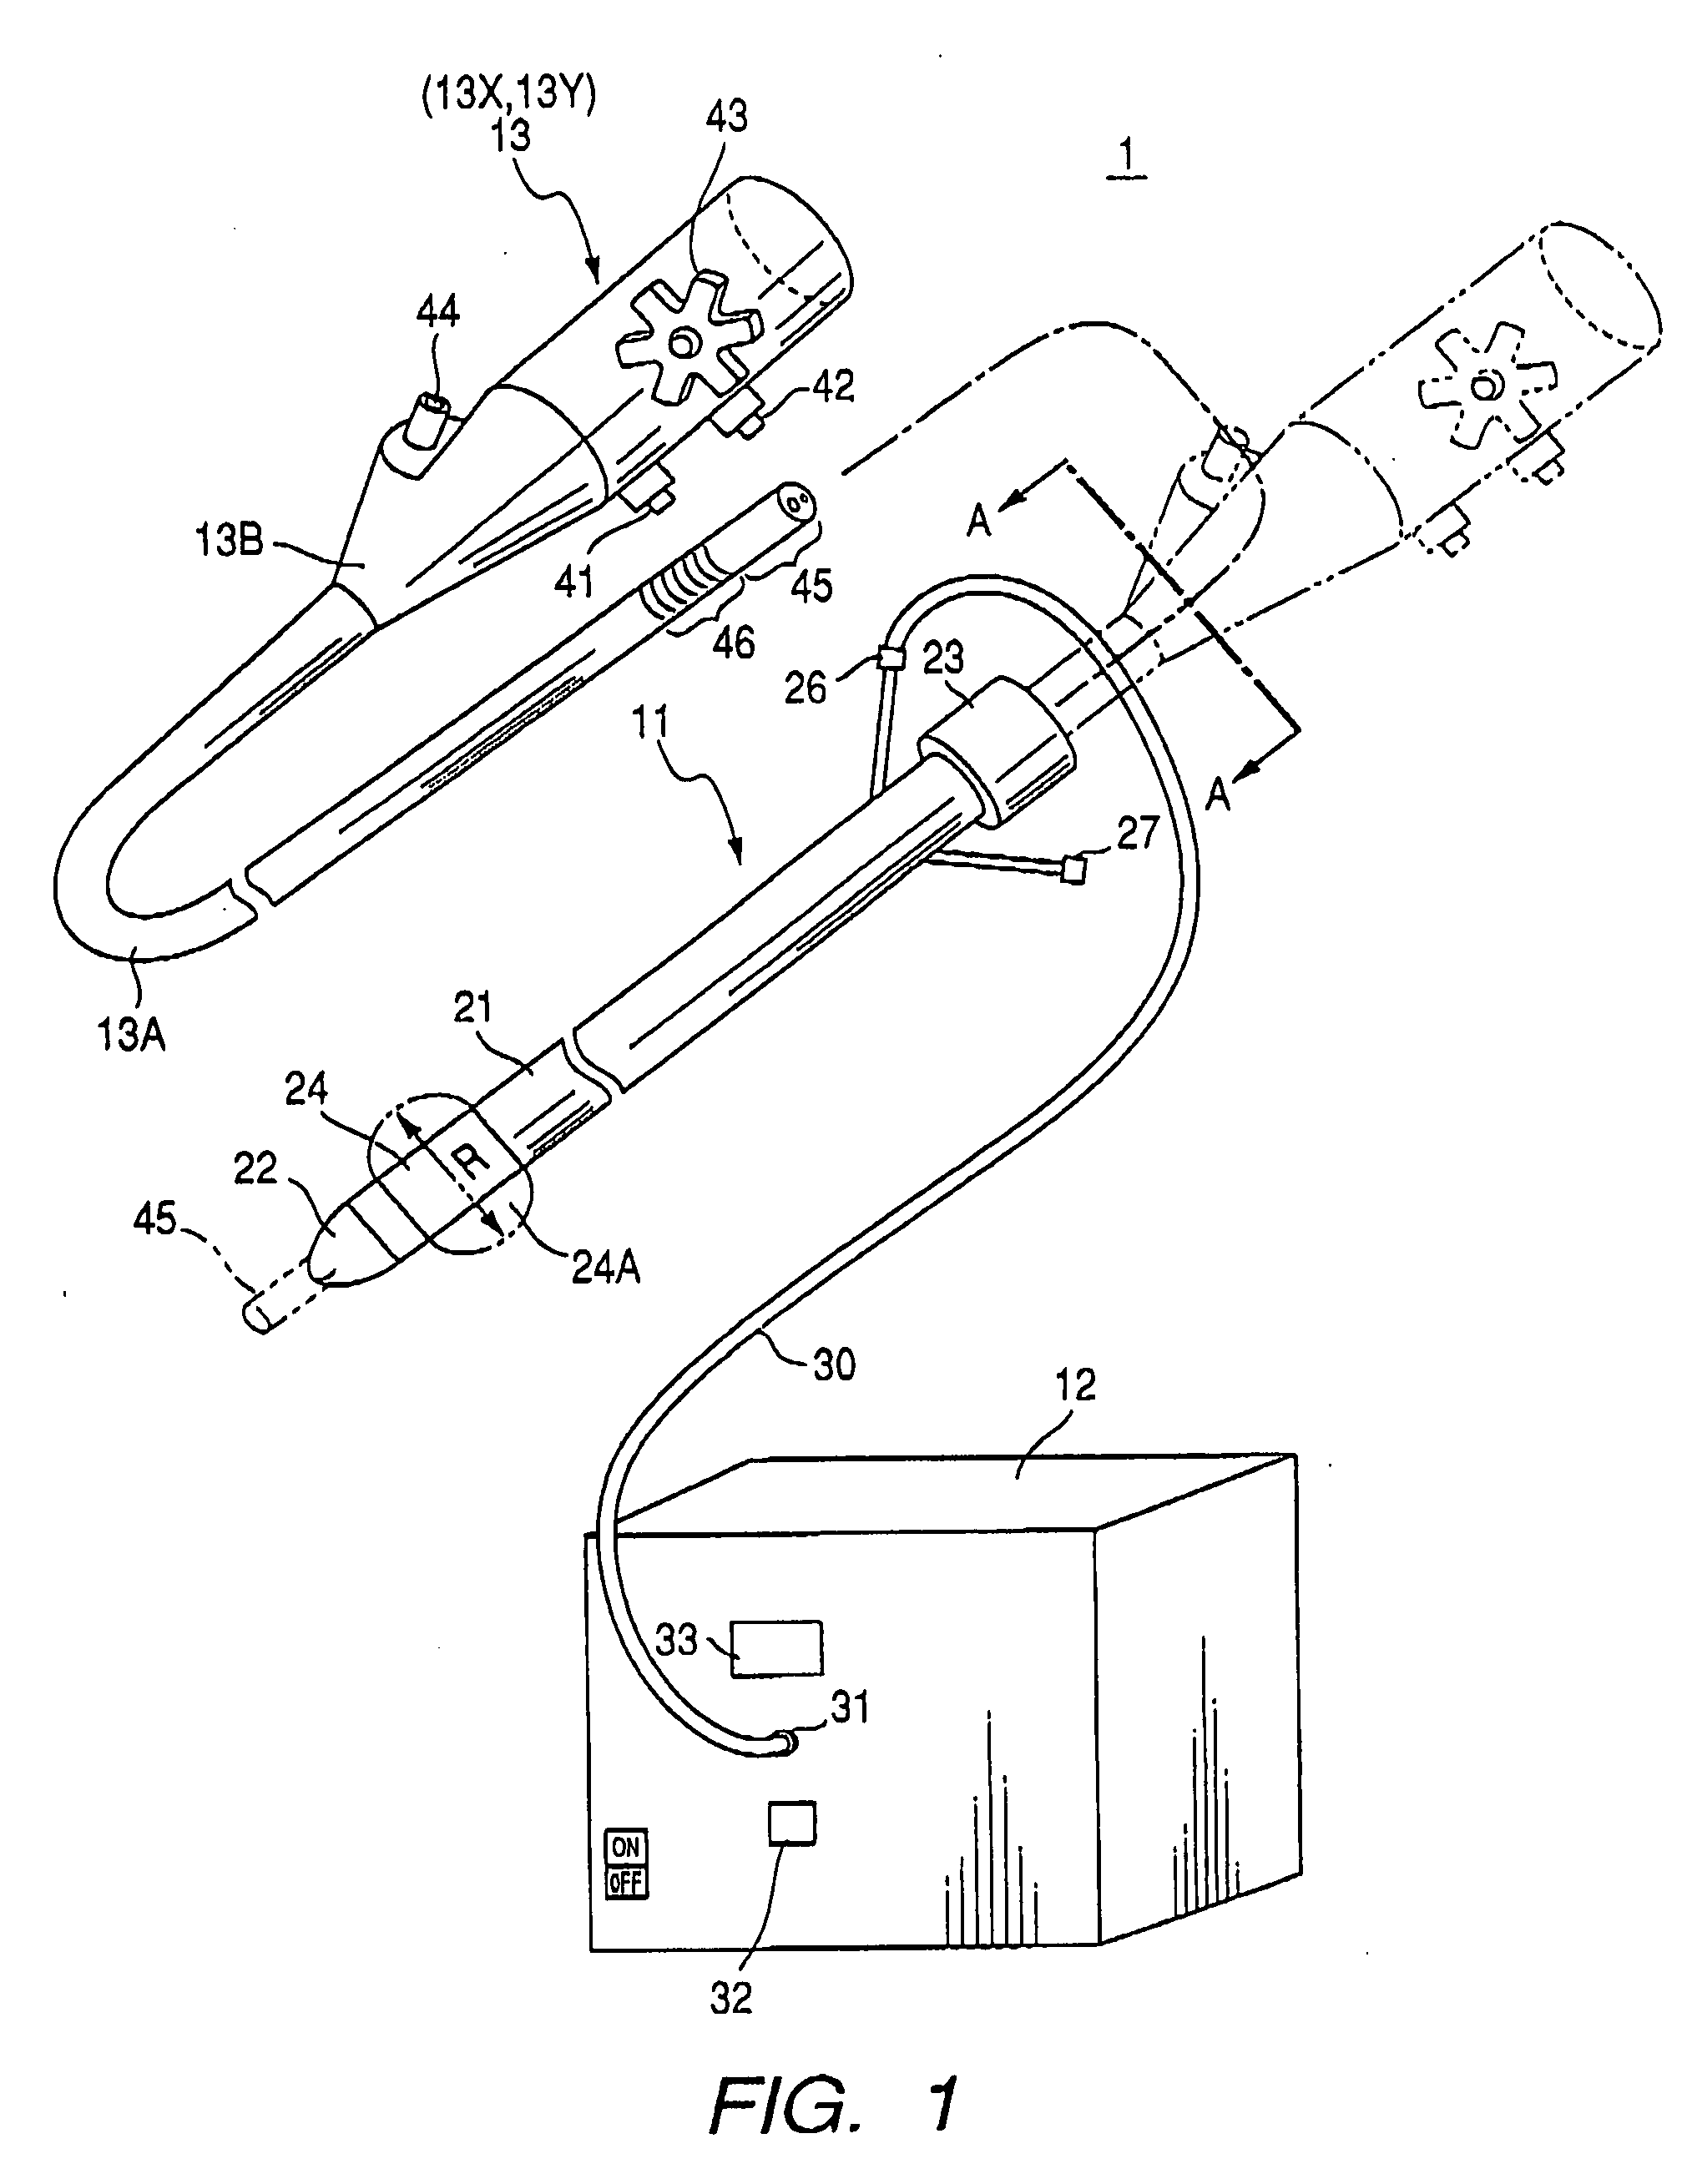 Therapeutic method and endoscopic system that use overtube